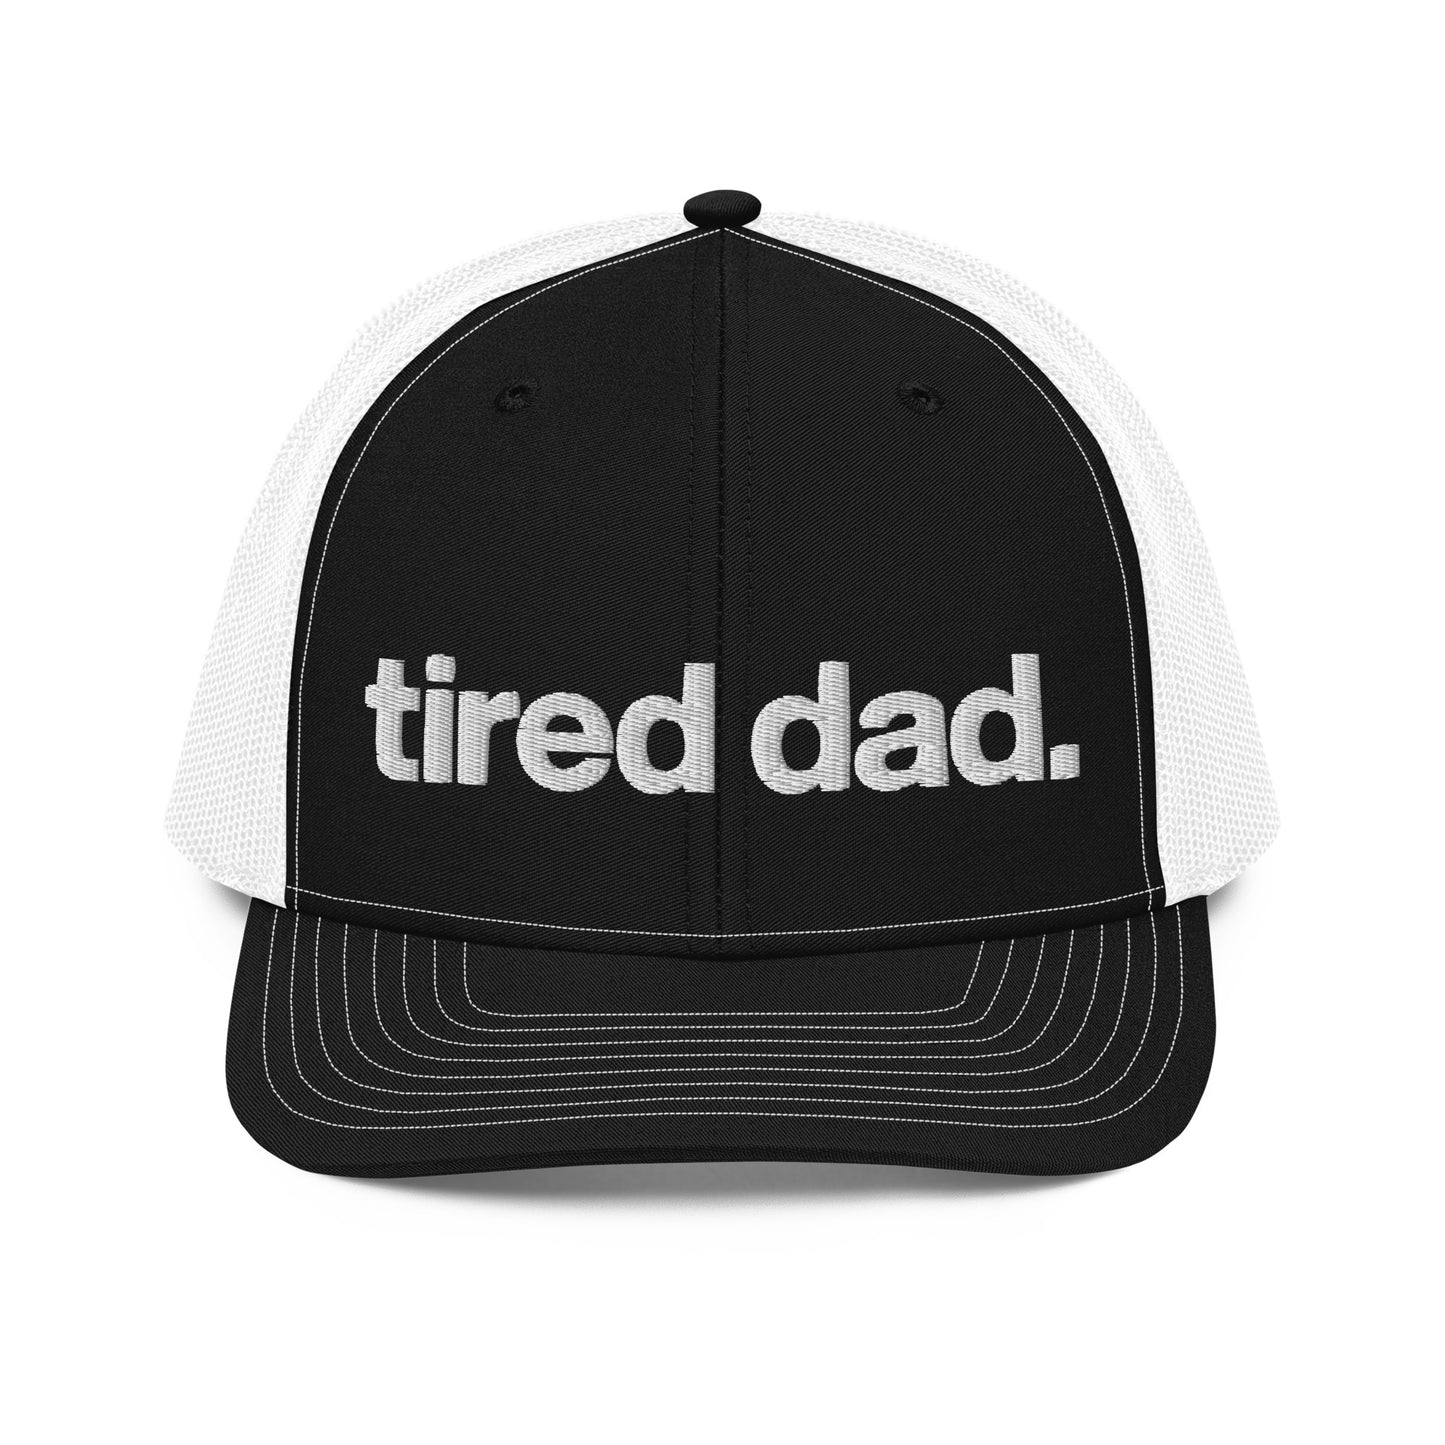 tired dad. trucker hat with 3D embroidery